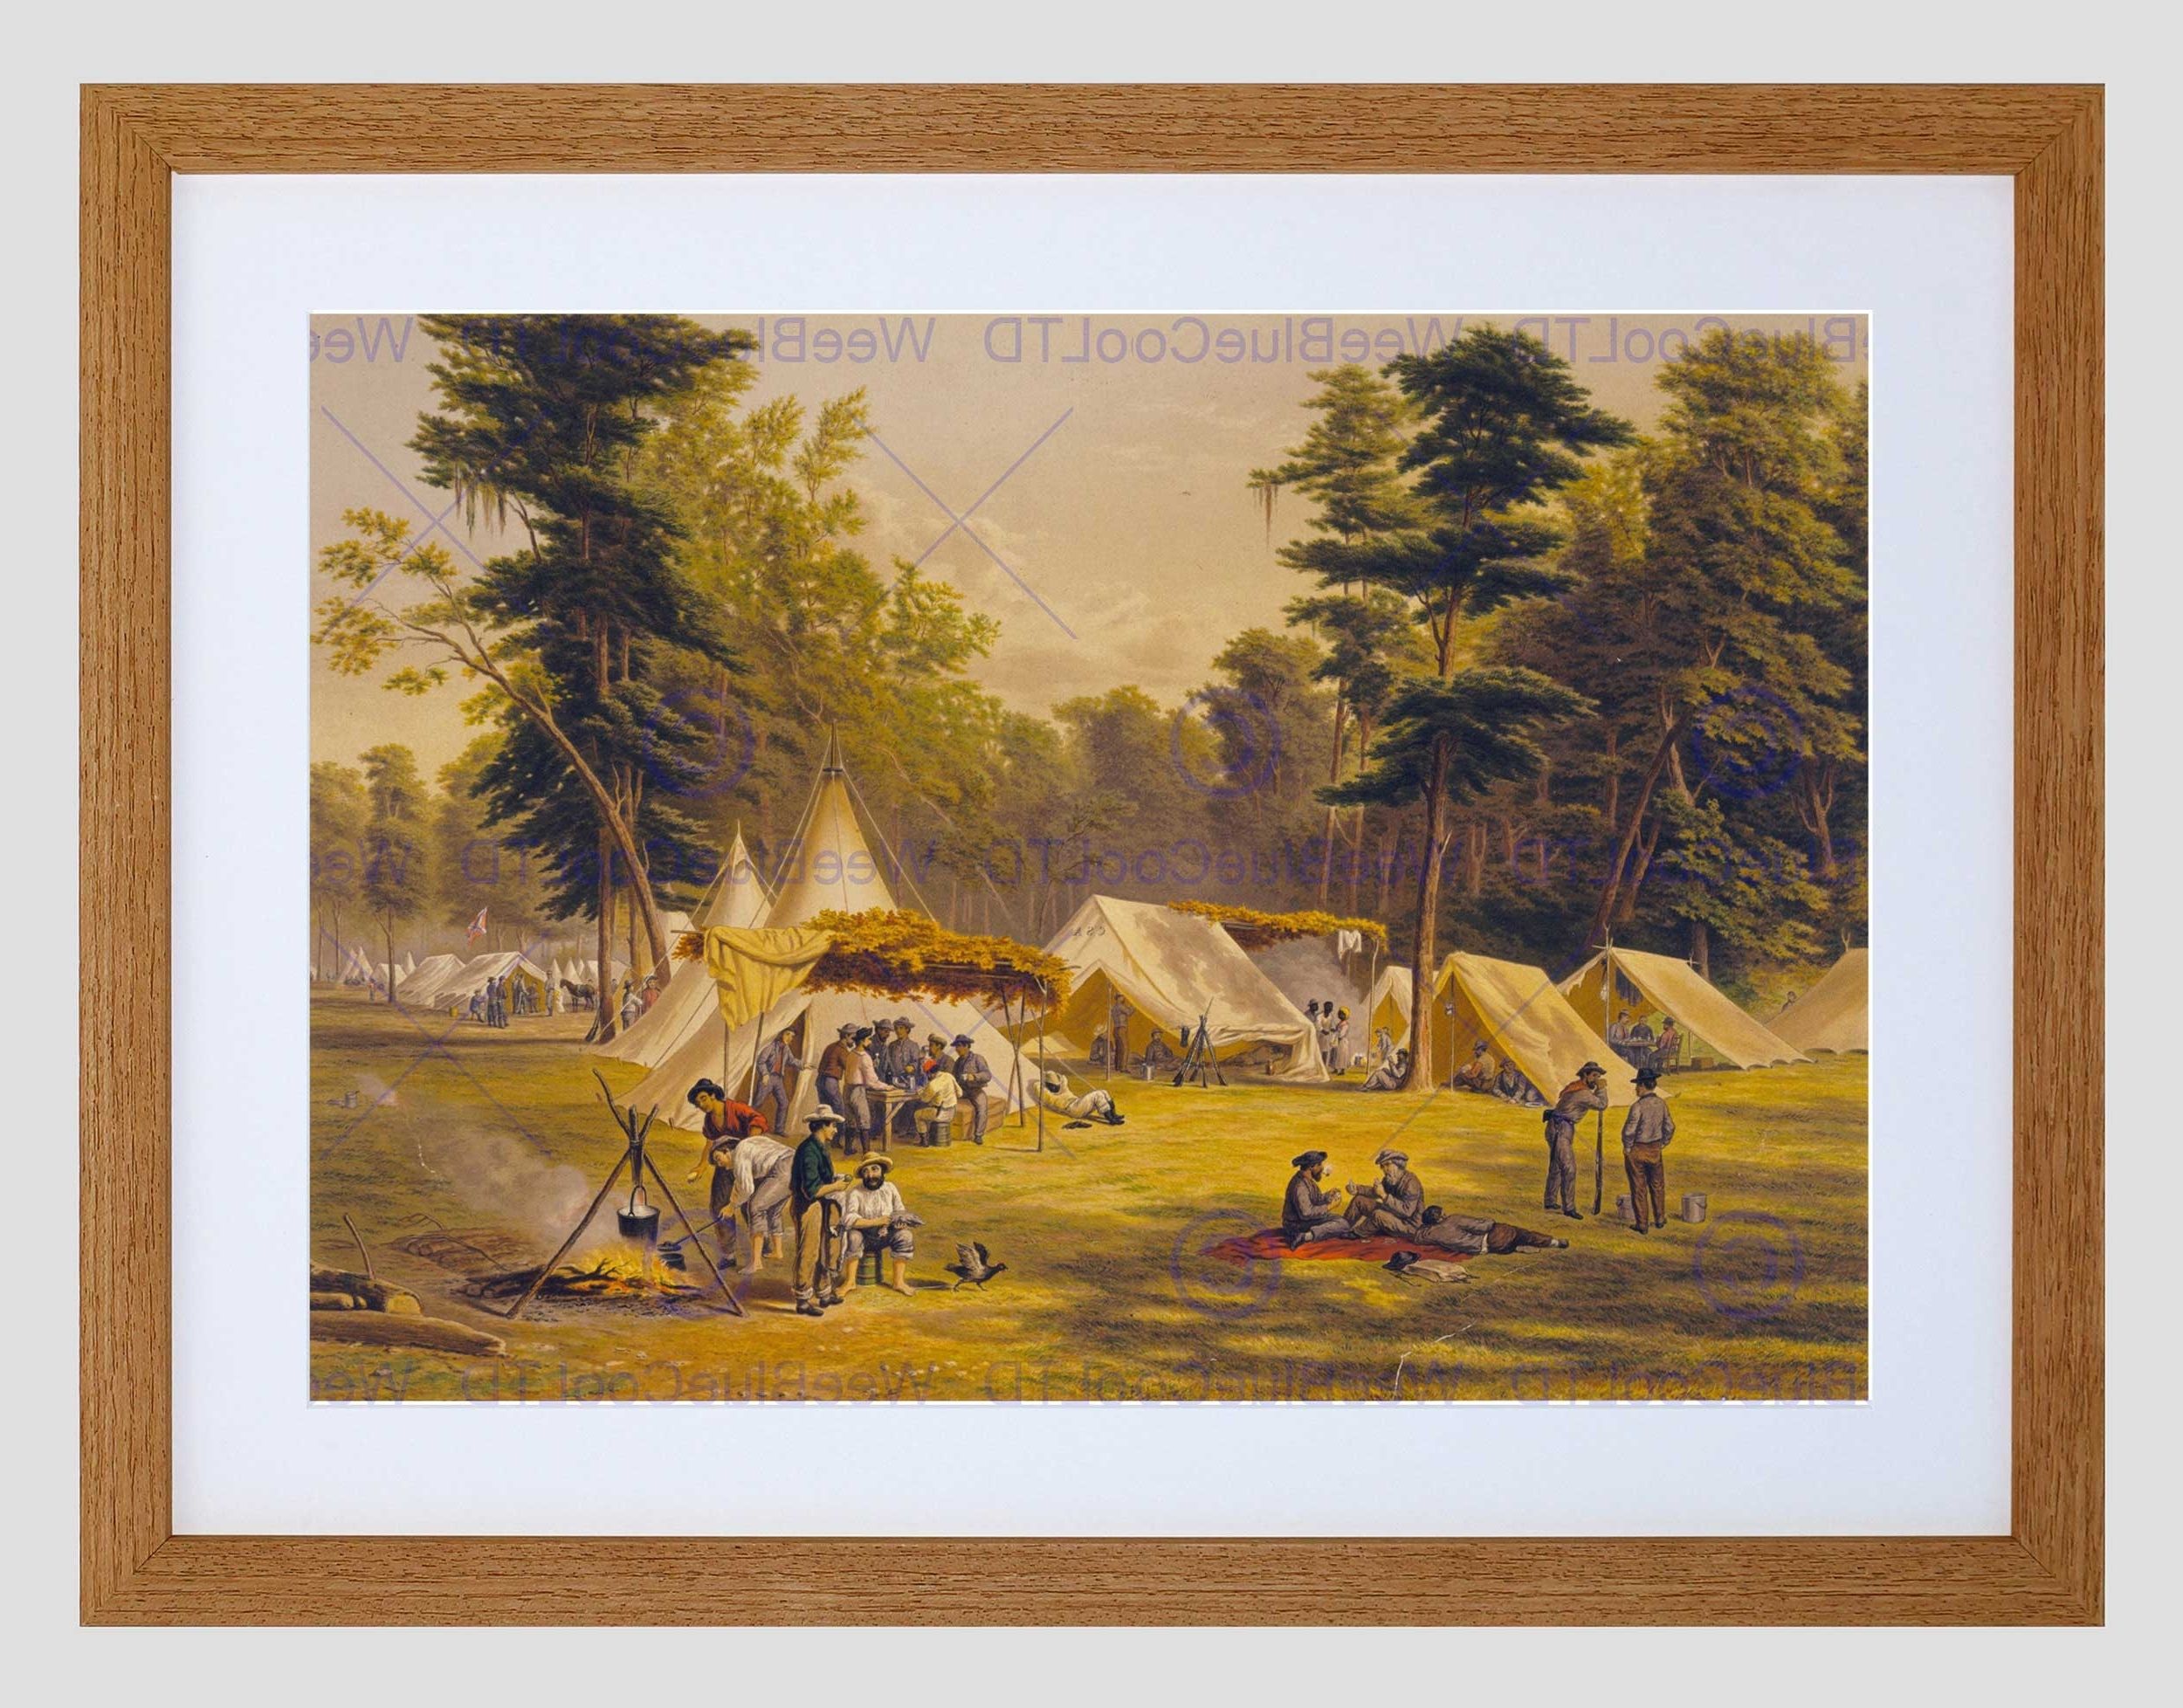 Widely Used Paintings Confederate Army Camp American Civil War Framed Art With Regard To Confederate Framed Art Prints (View 1 of 15)